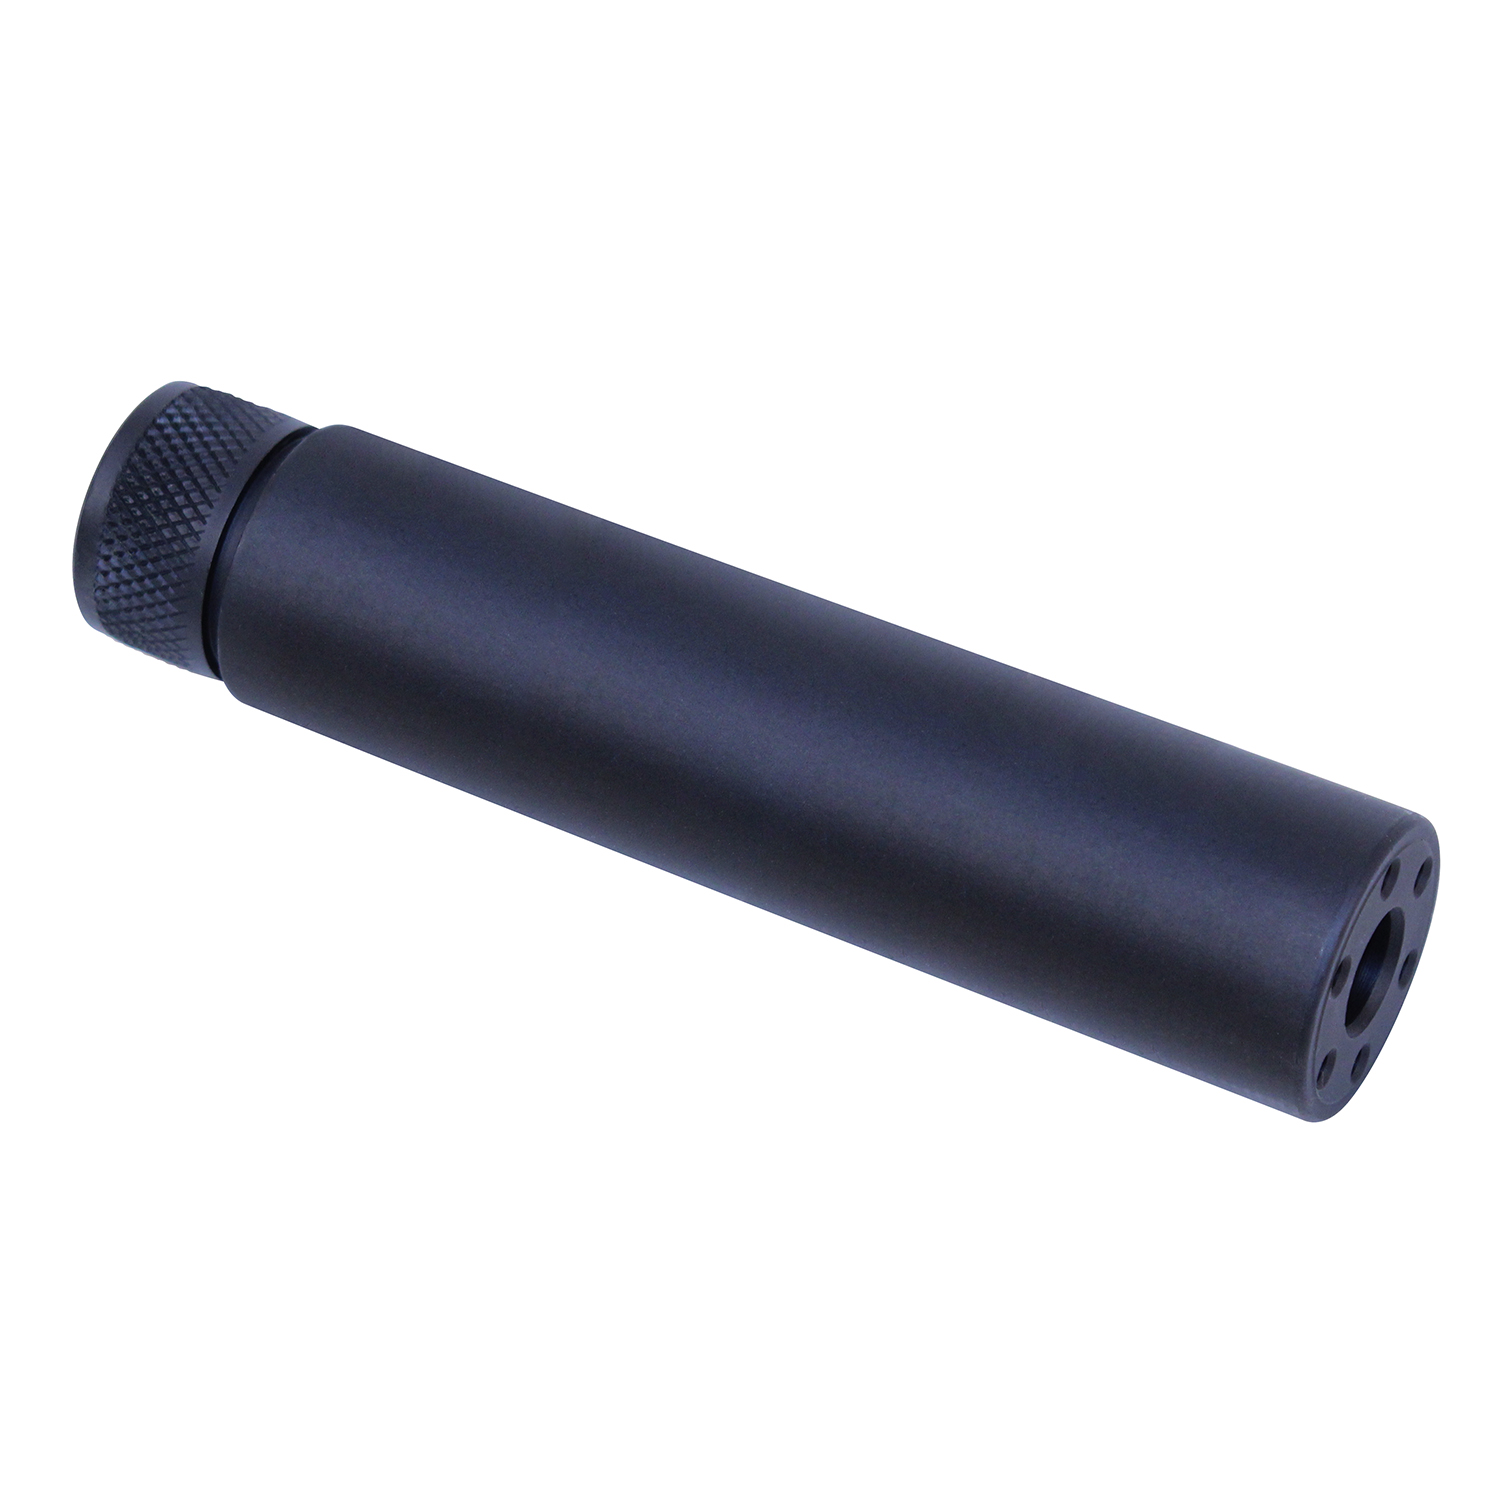 AR-15 5.5-inch long fake suppressor with an anodized black finish